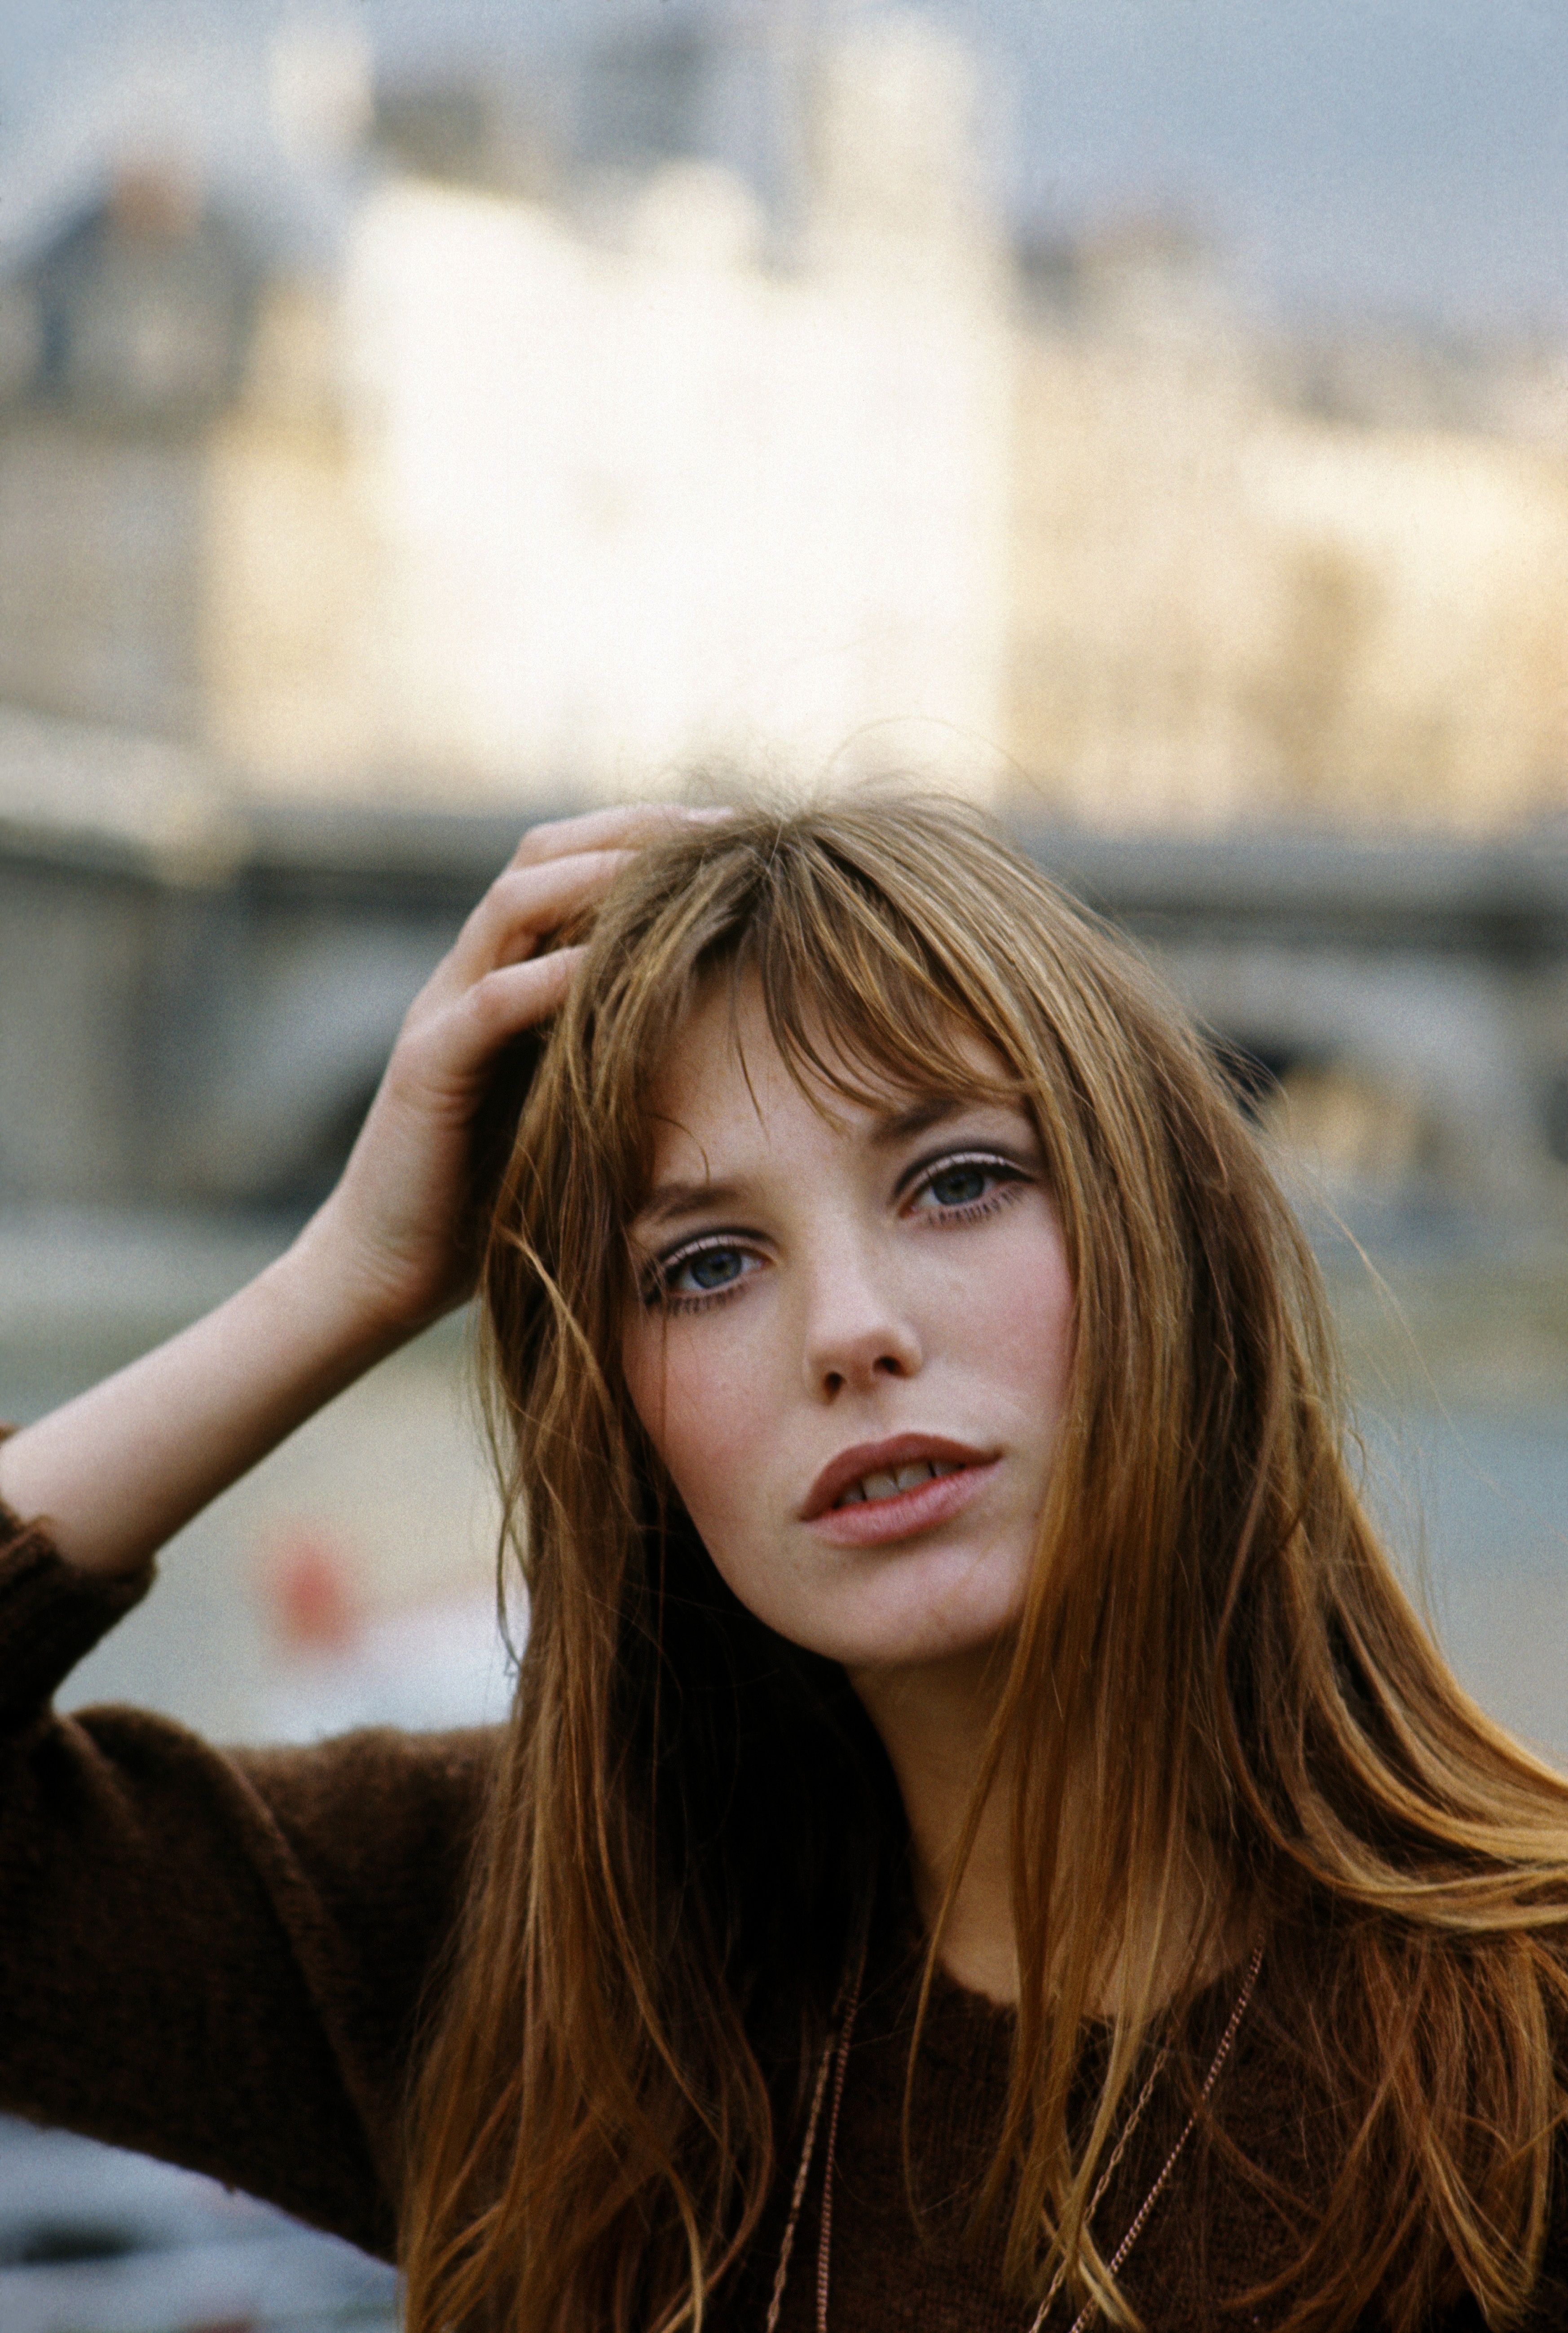 The Life Of An Icon: Who Was Jane Birkin?